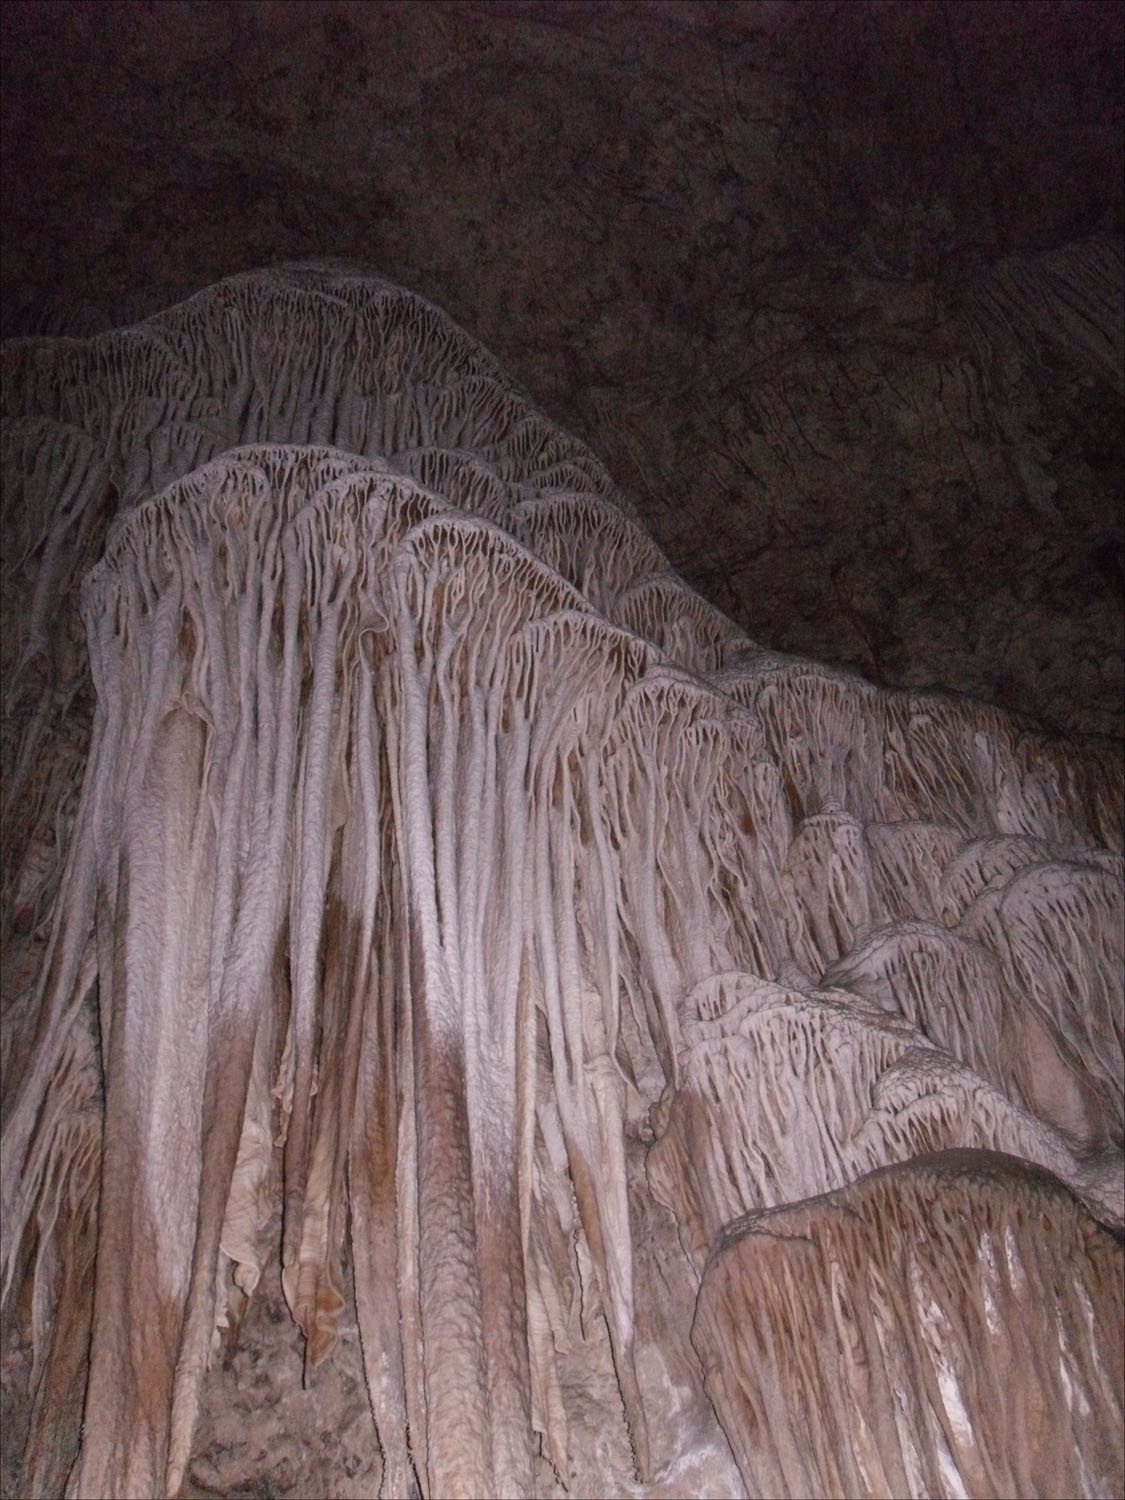 Carlsbad Caverns, NM-large drapery formation on wall